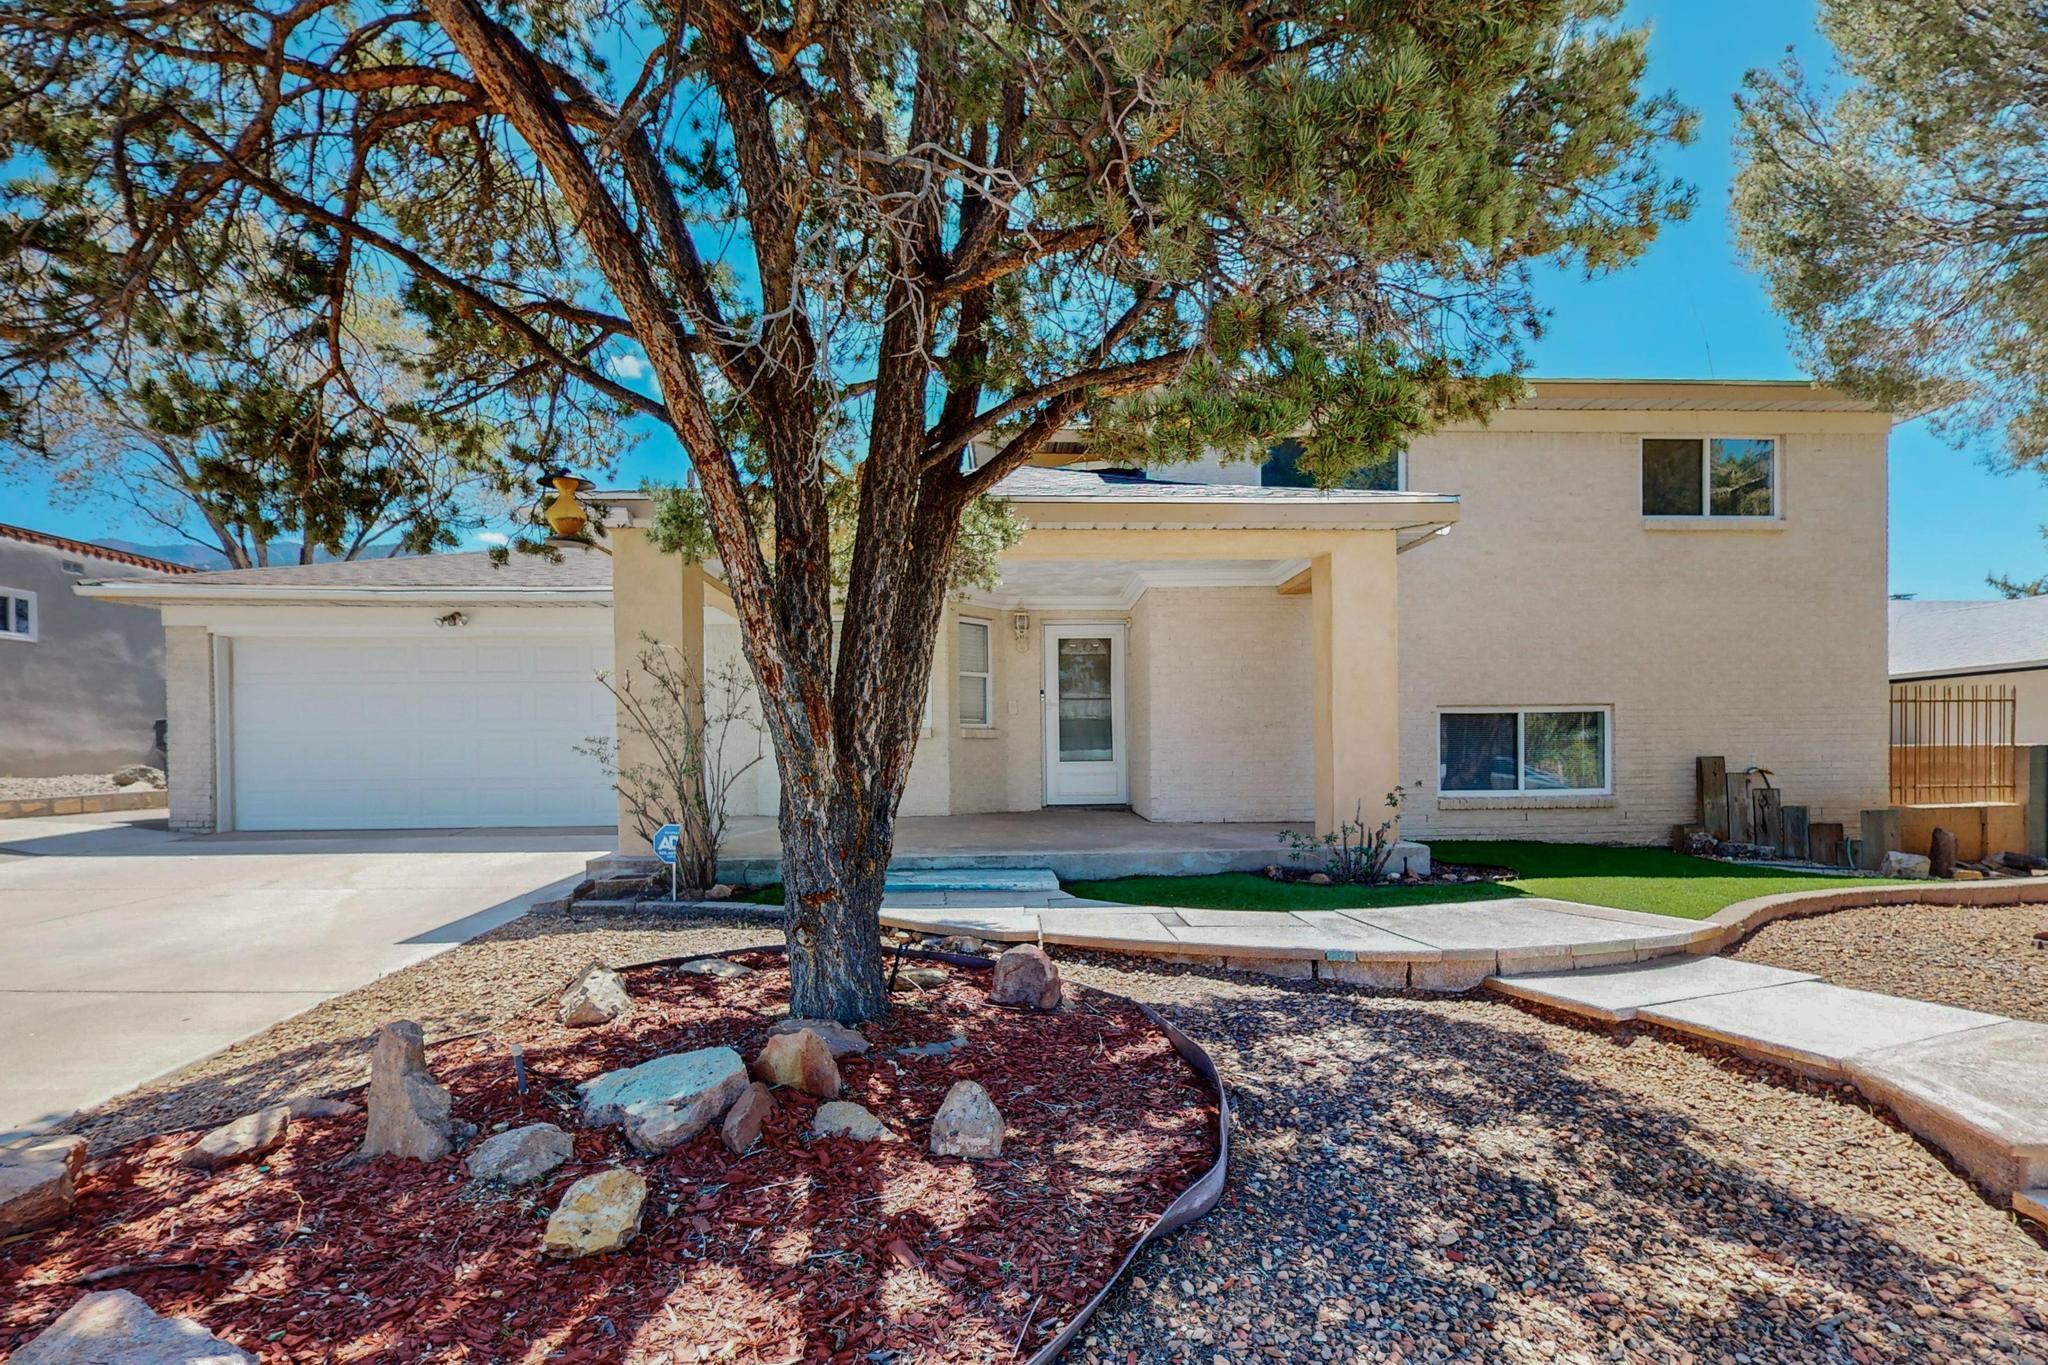 Welcome to the highly desirable Far NE Heights area of Albuquerque.  This amazing custom home offers an incredible opportunity to live in a quiet neighborhood near popular shopping, excellent schools, parks, access to freeways and much more.  The front yard boasts a meticulously maintained custom walkway, mature vegetation and low maintenance beauty.  Natural shade for hot summer days!  Enter into a spacious living area, extra dining space and beautiful kitchen that is sure to impress.  You'll never bore of being at the kitchen sink with unobstructed mountain views! Backyard building is permitted (320 sq ft) and comes complete with a new roof, garage door access and climate control (heat + electric). Brand new roof (see LO/SO), new carpet, new paint and so much more to brag about!